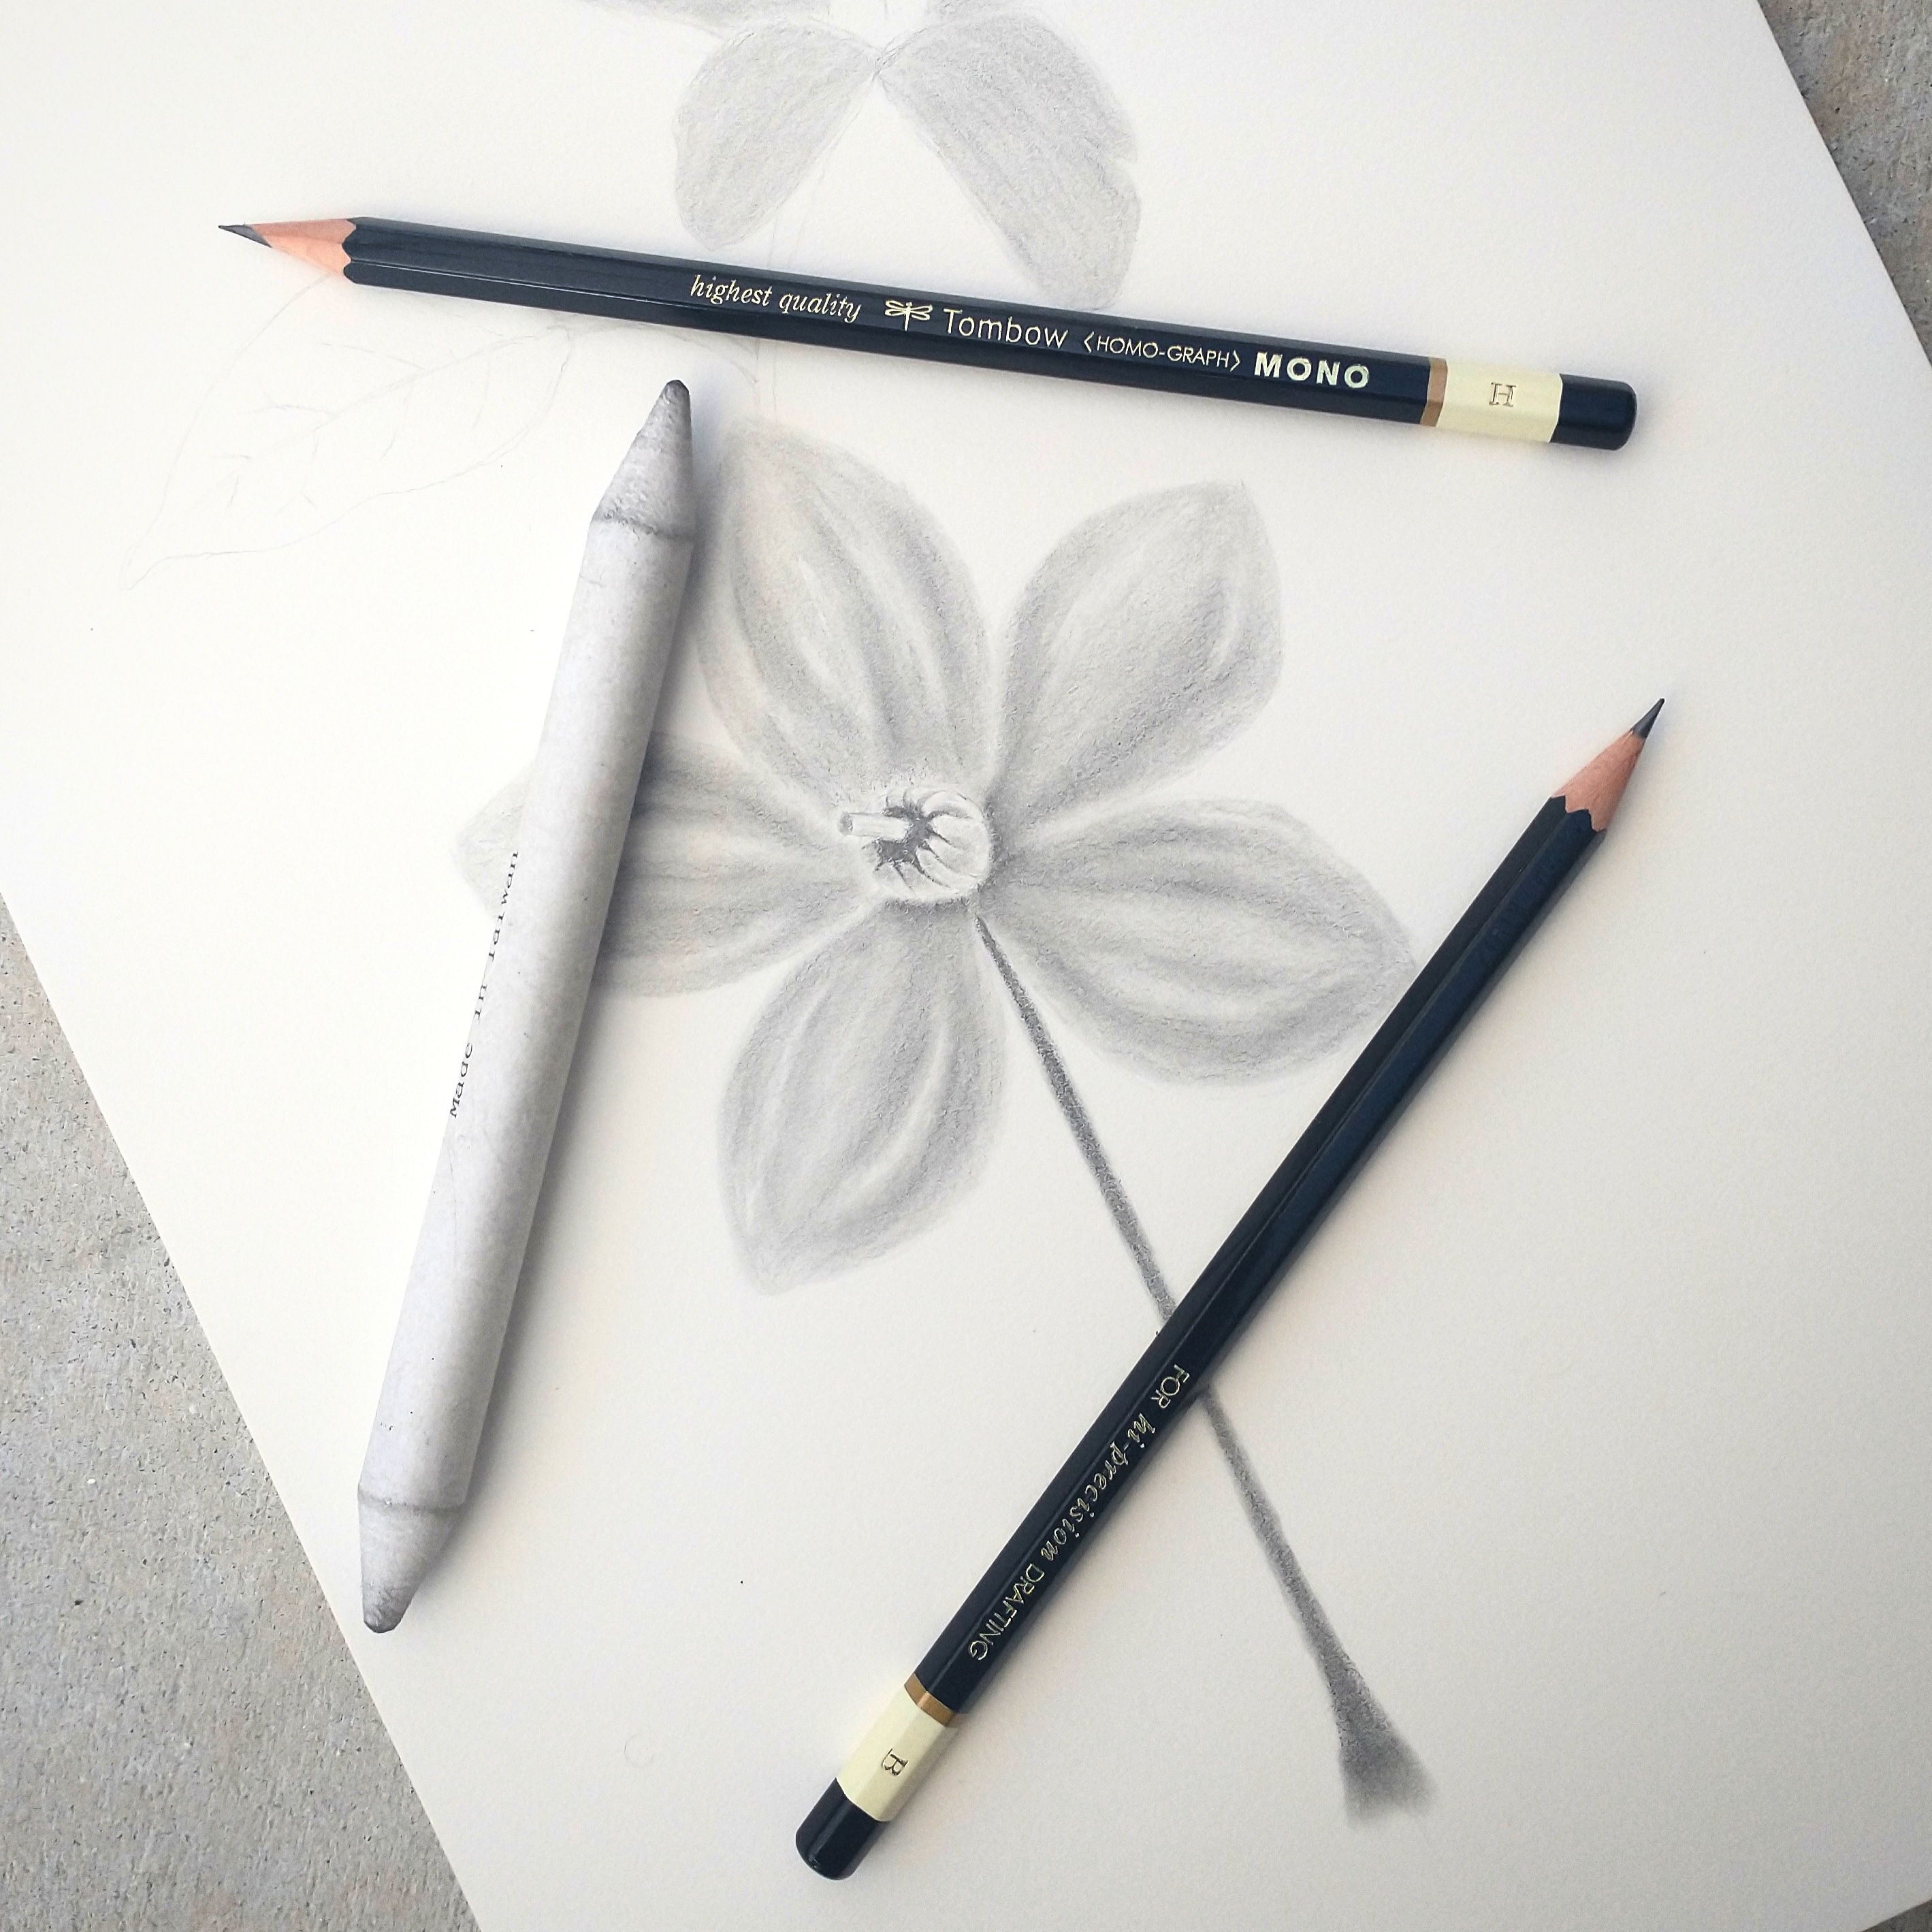 Drawing techniques: pencil drawing for beginners - Gathered